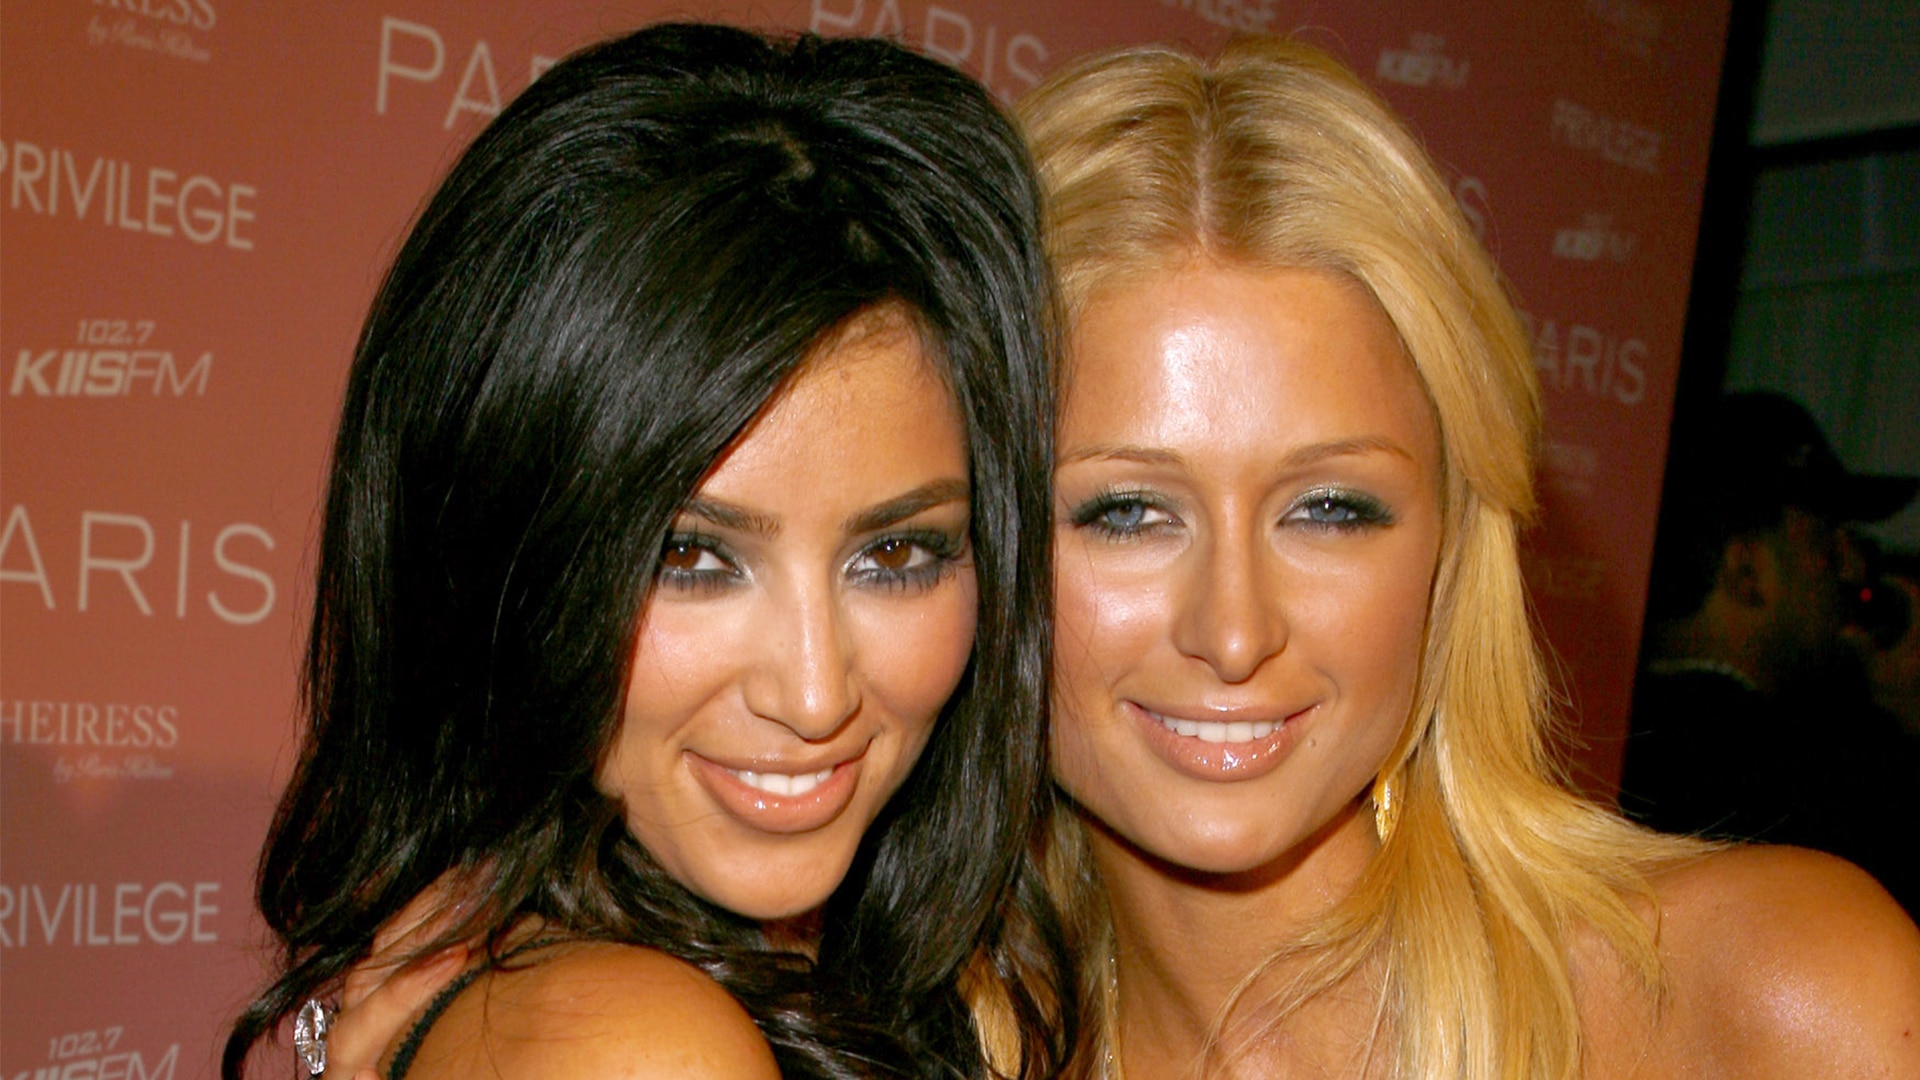 Watch Access Hollywood Interview Kim Kardashian Credits Paris Hilton For Helping Launch Her